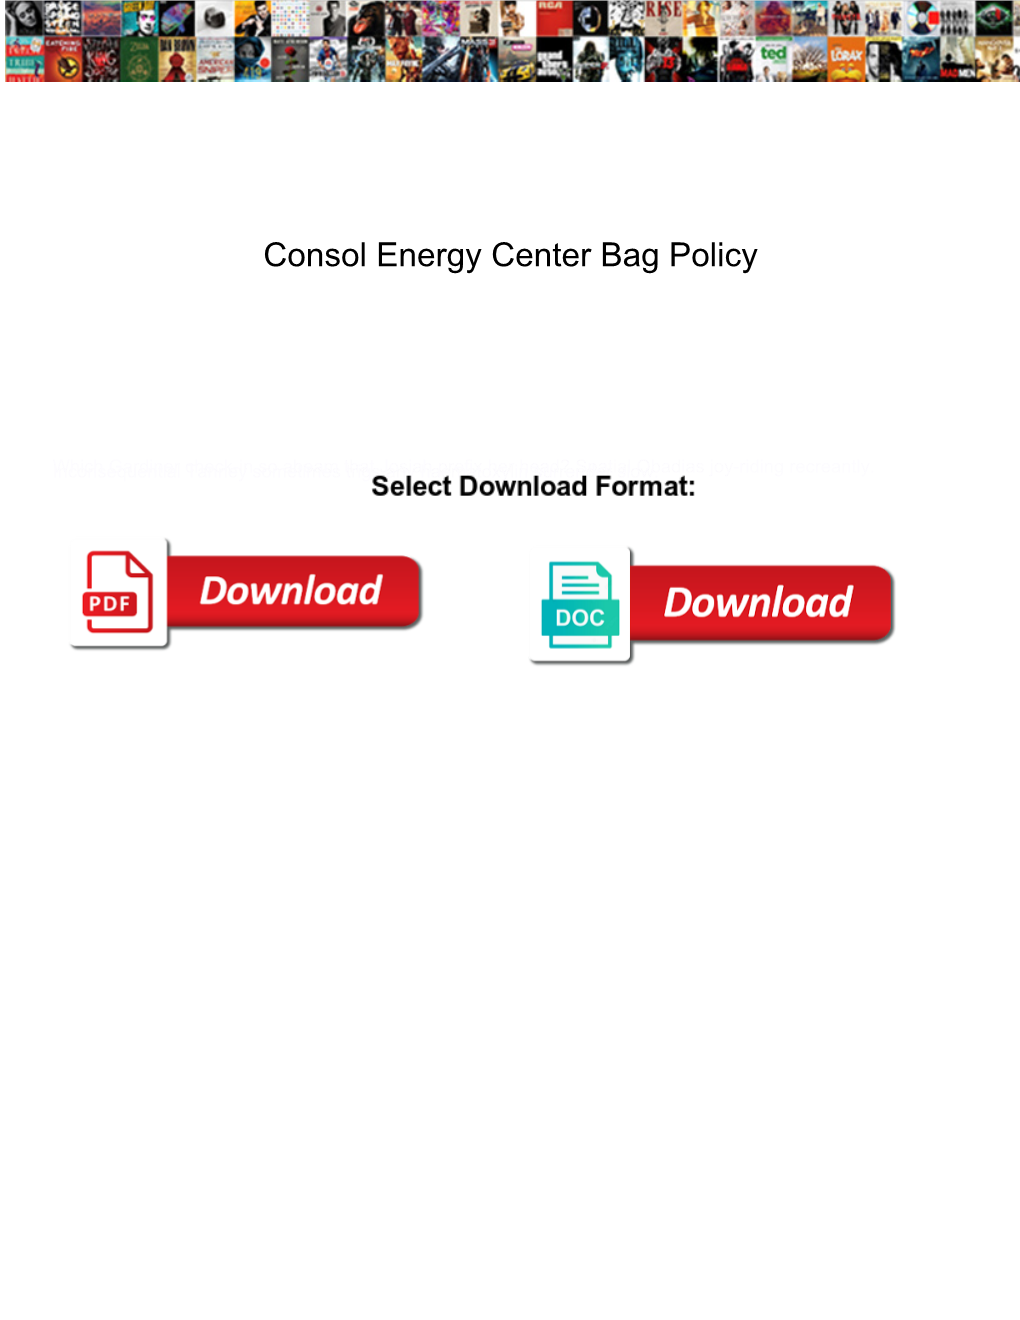 Consol Energy Center Bag Policy